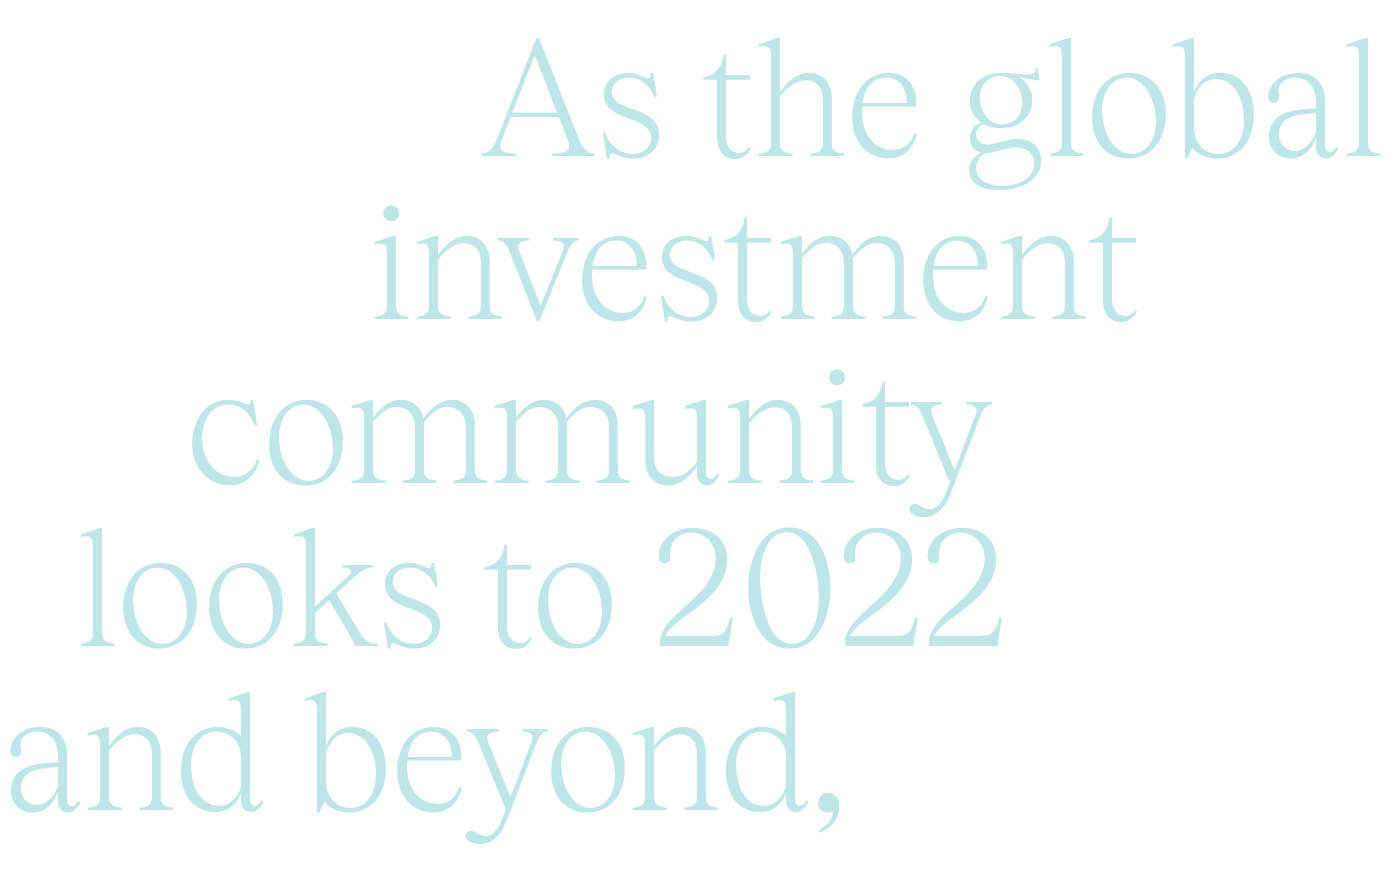 As the global investment community looks to 2022 and beyond